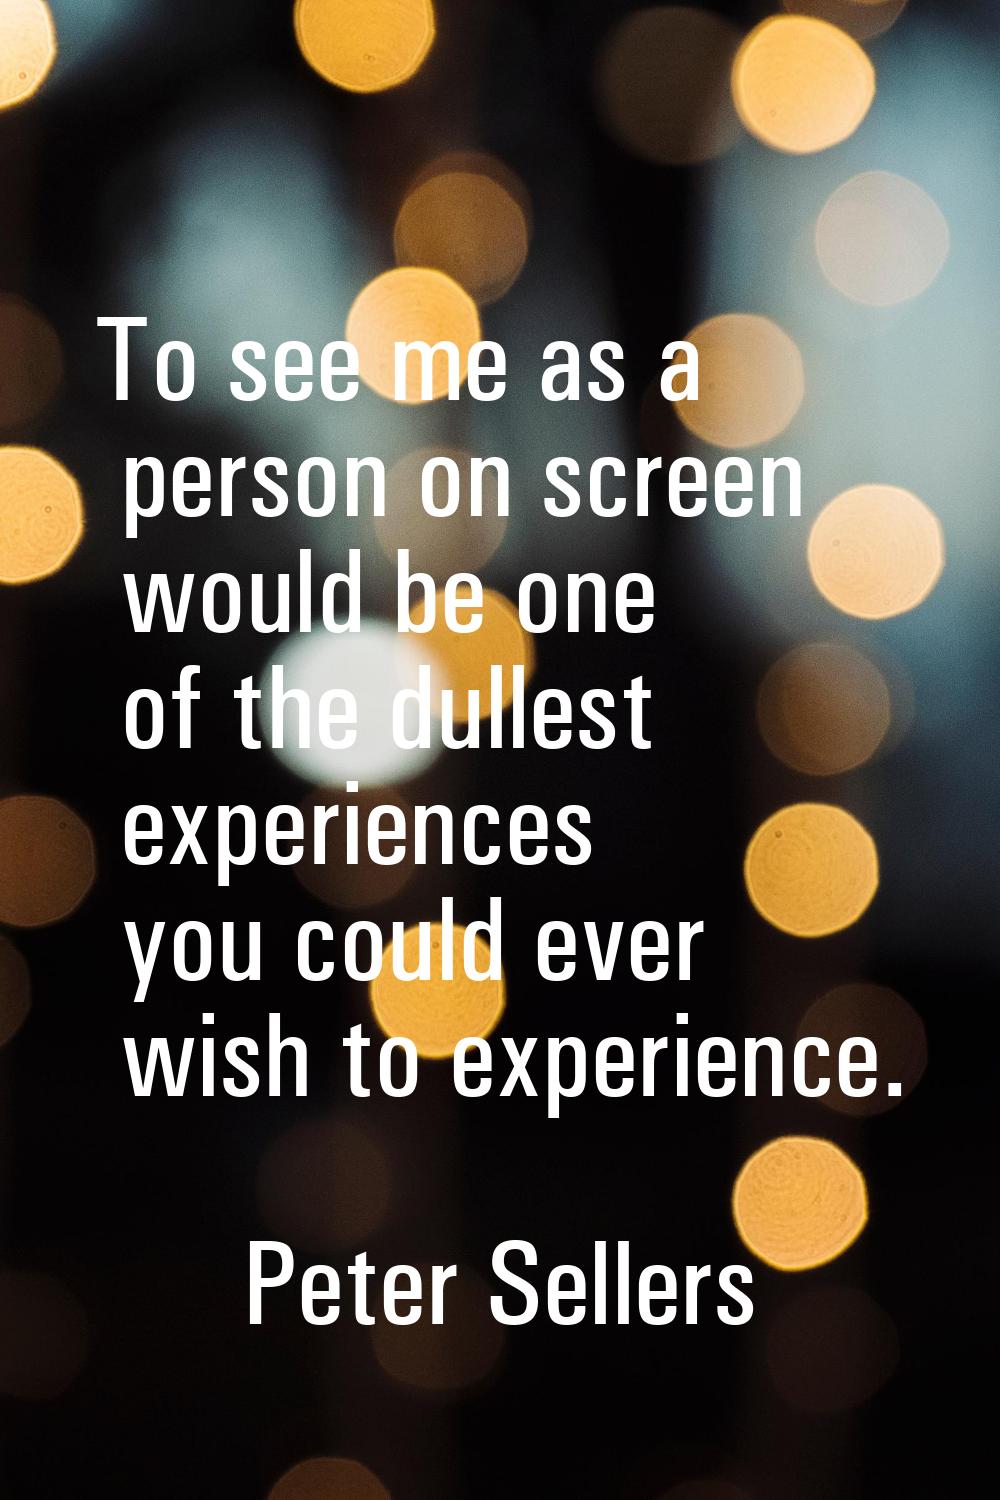 To see me as a person on screen would be one of the dullest experiences you could ever wish to expe